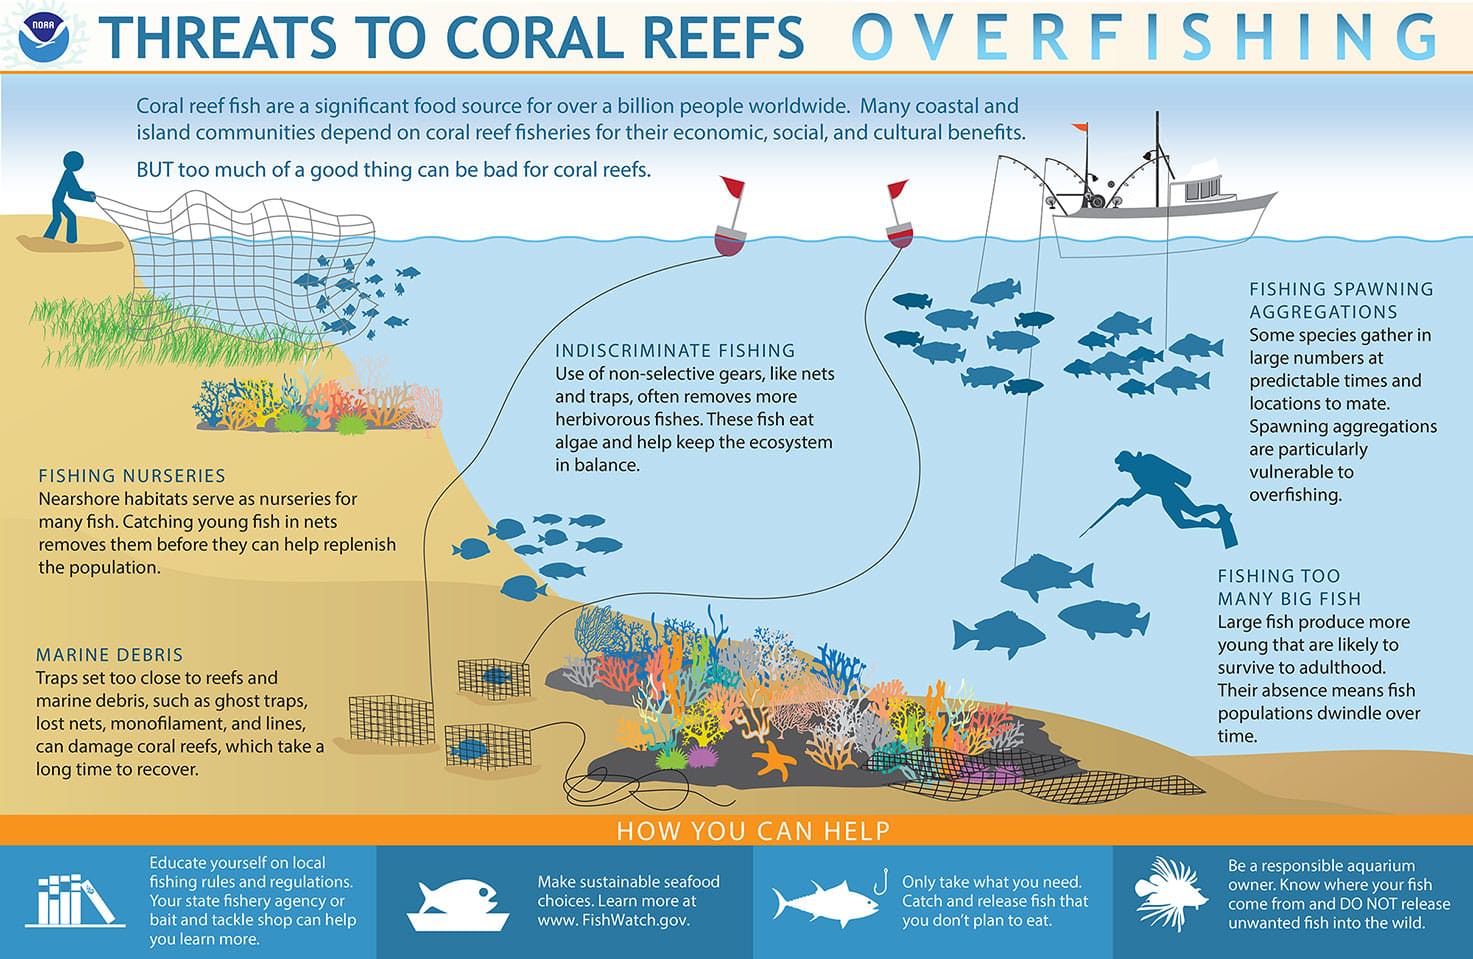 I. Introduction to Coral Reefs